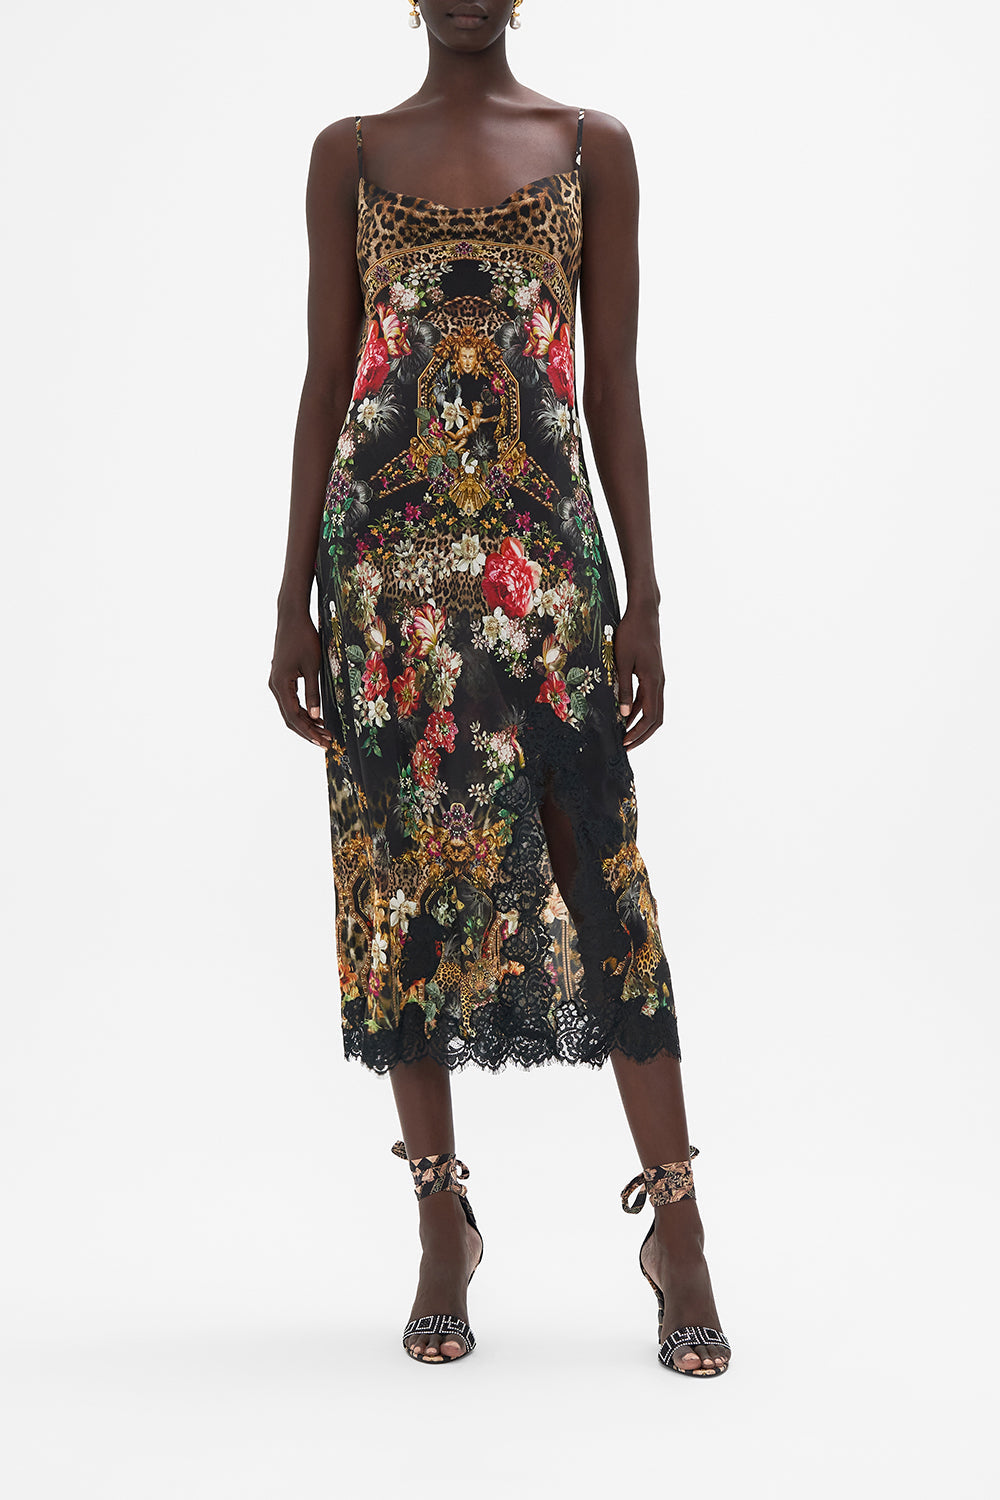 Front view of model wearing CAMILLA silk bias slip dress in A Aight At The Opera floral print  